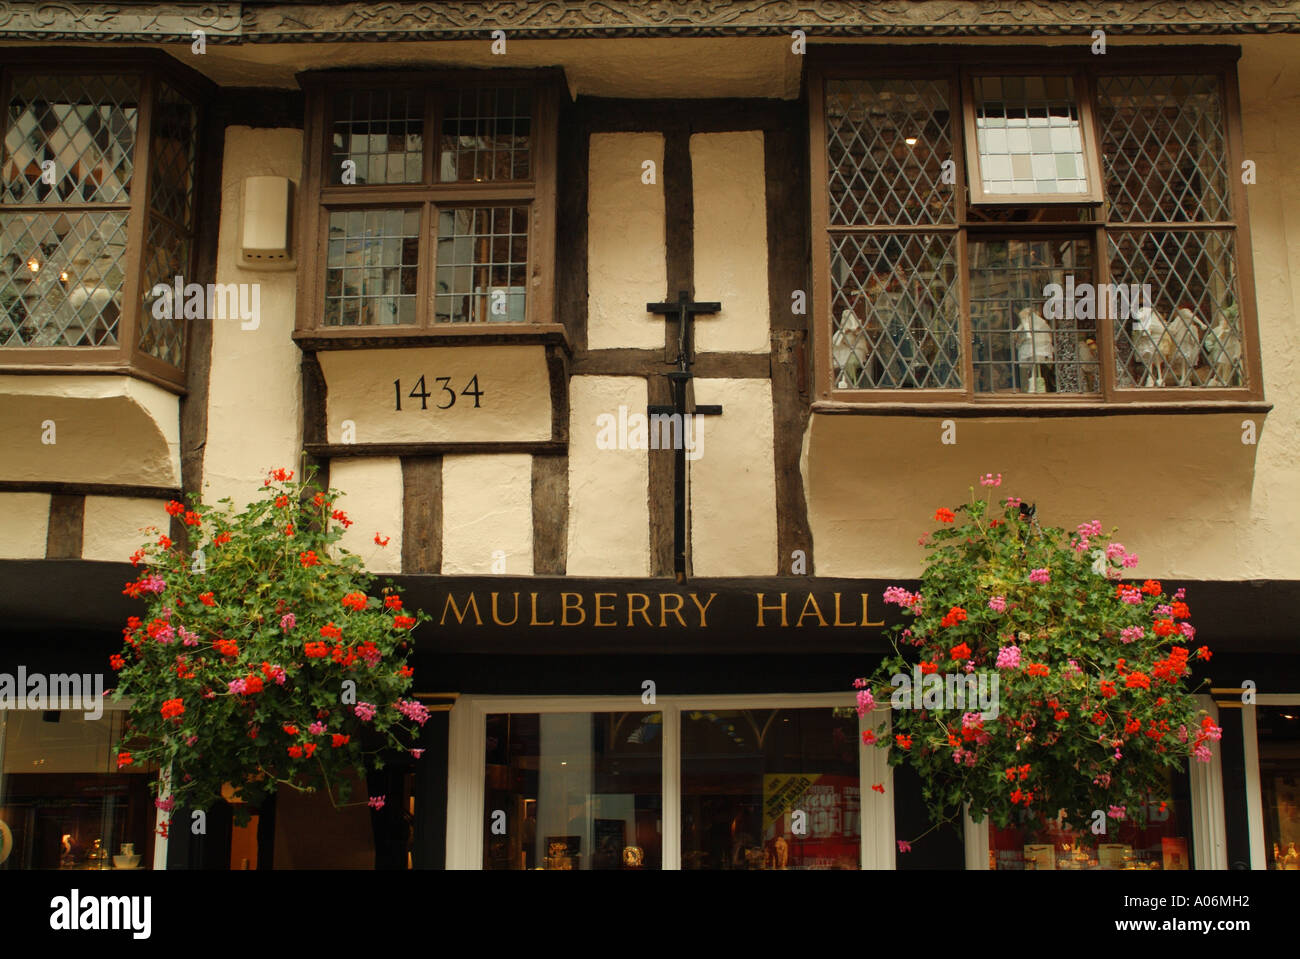 Mulberry Hall in Stonegate, York, England, UK Stock Photo